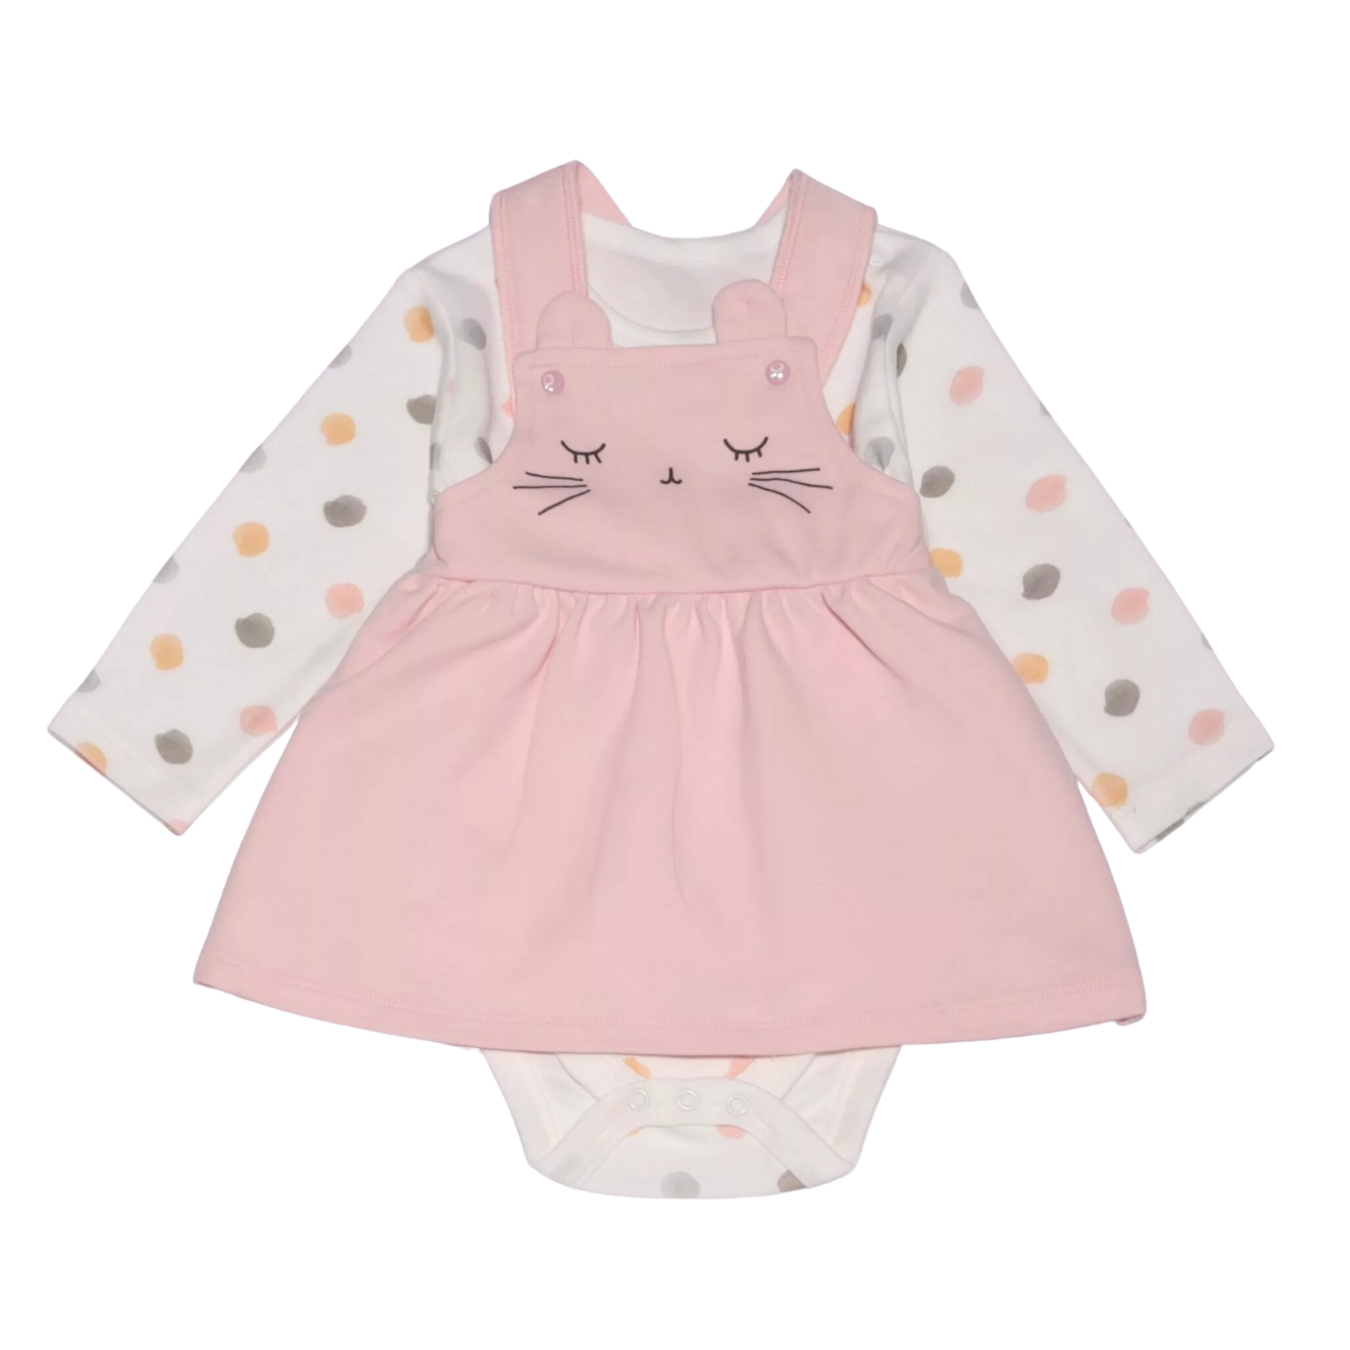 Baby & Toddler Clothing - best prices in Albania and fast delivery ...